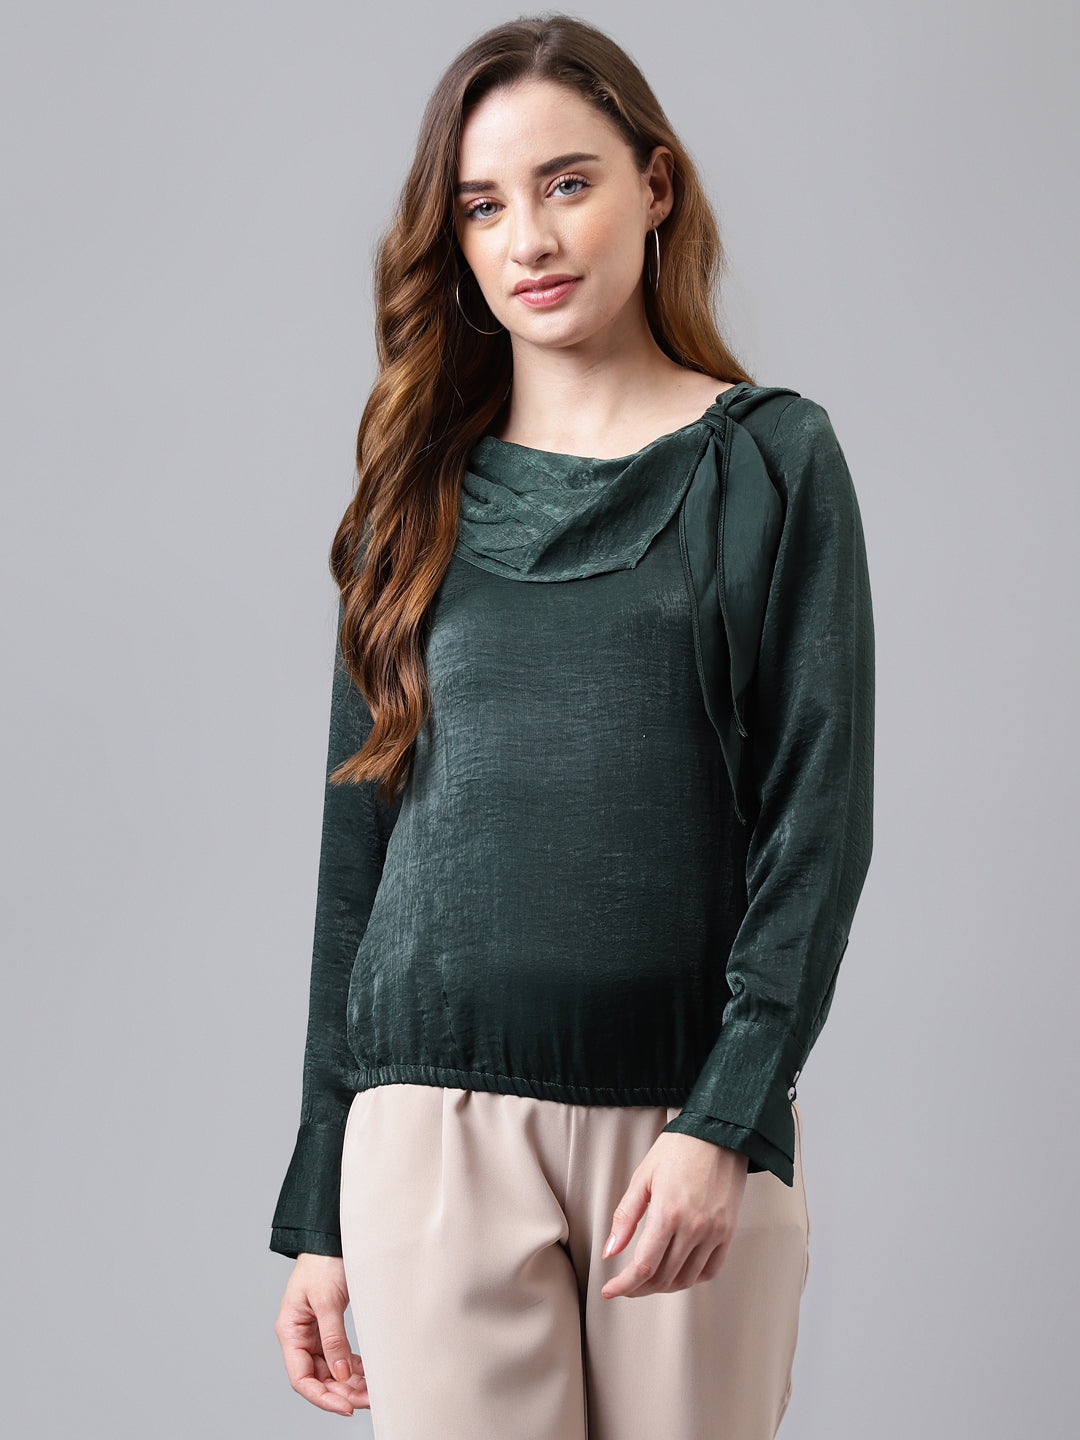 Greenbottle Full Sleeve Solid Normal Blouse Top